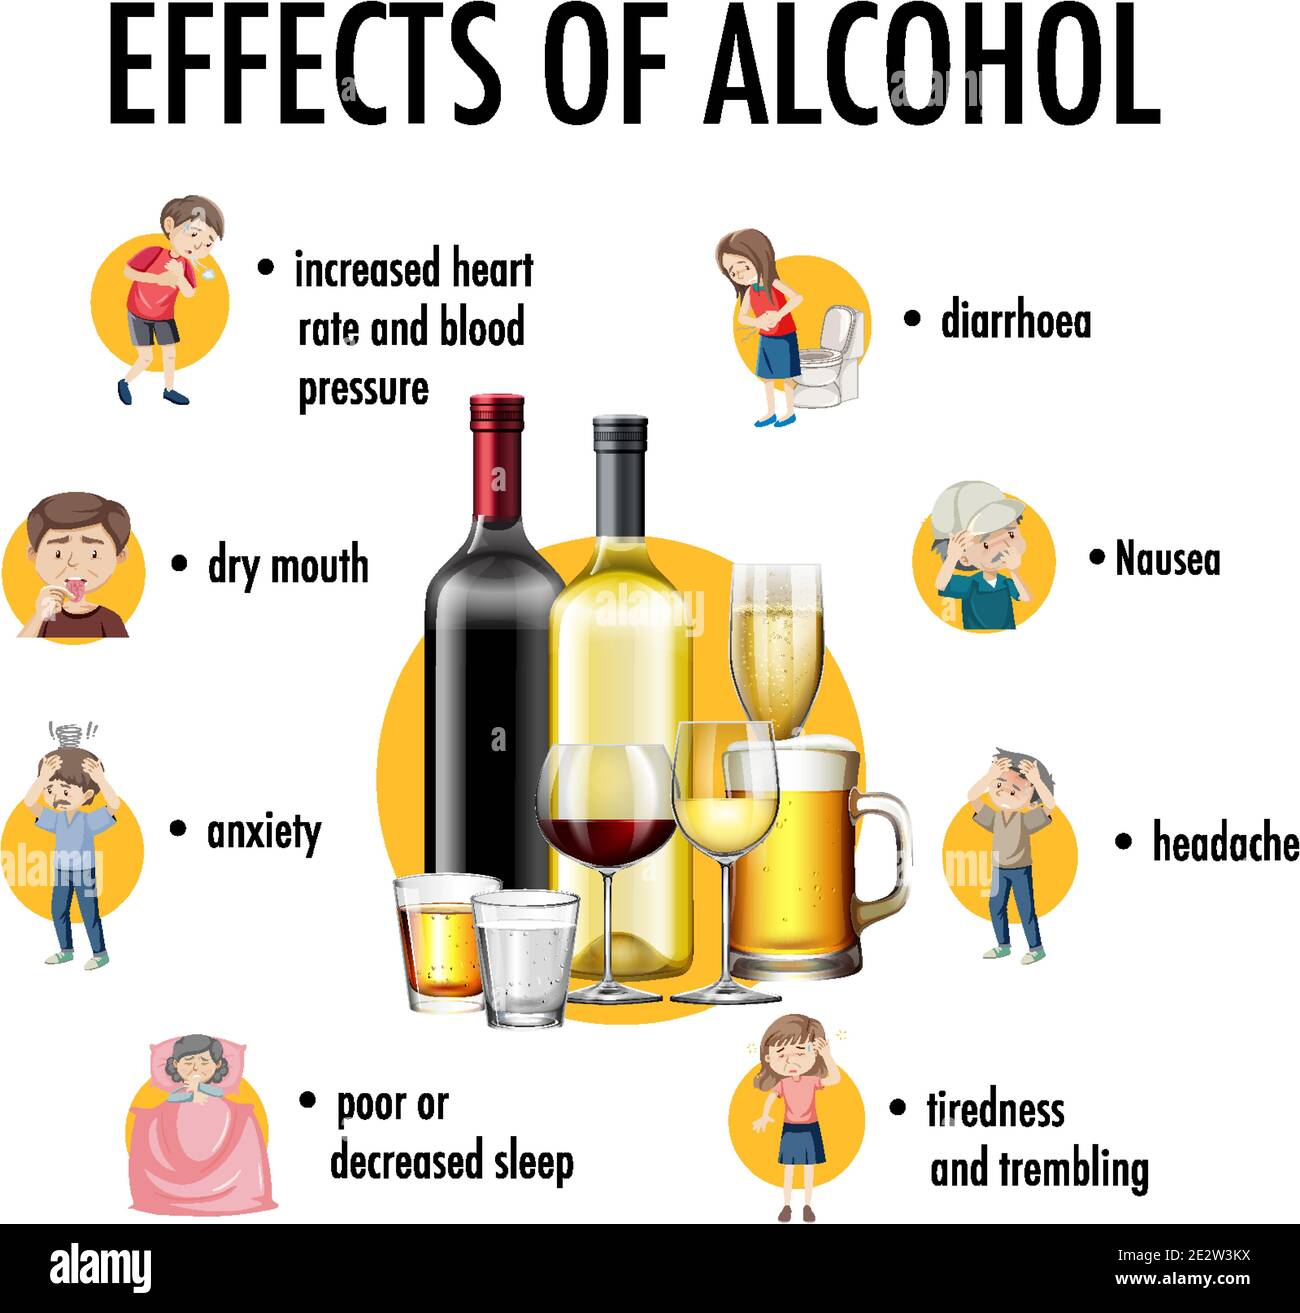 Effects of alcohol information infographic illustration Stock Vector